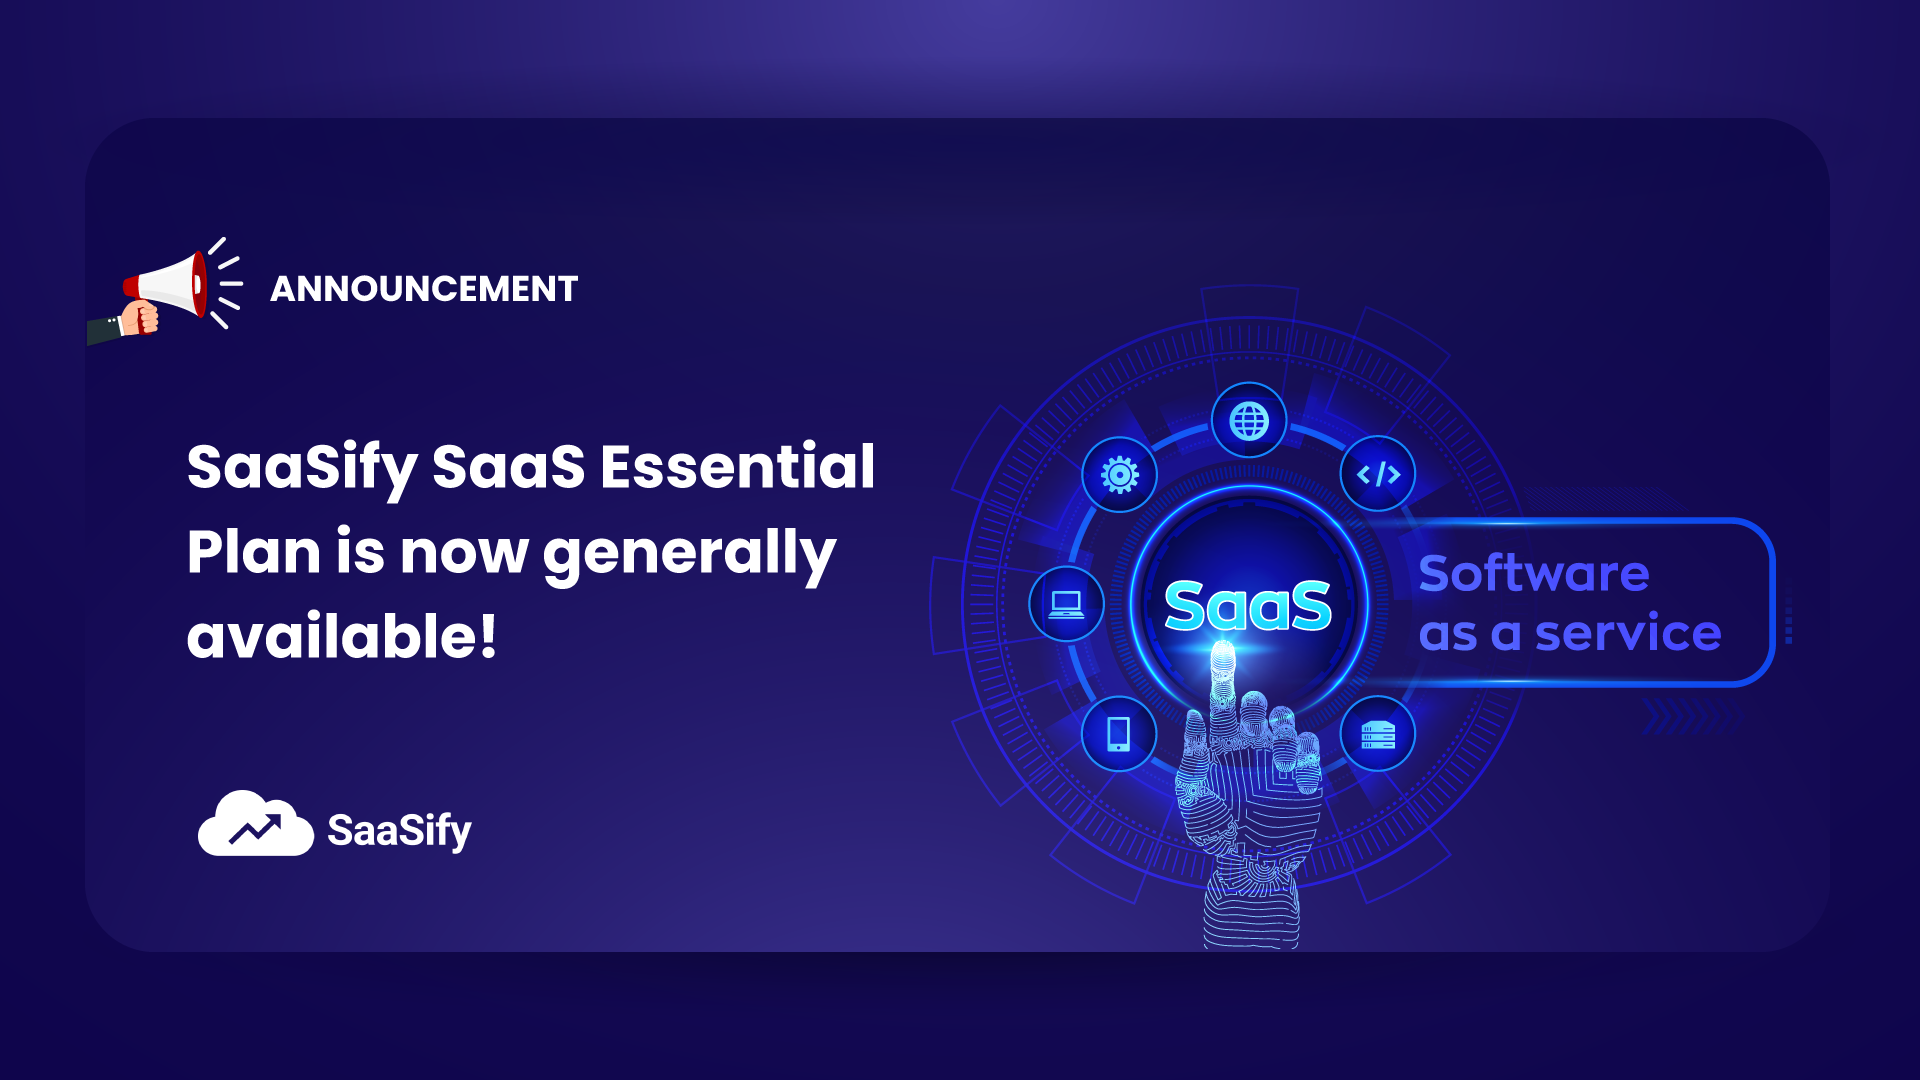 SaaSify Essentials Plan to Help ISVs Accelerate their Cloud Marketplace Journey